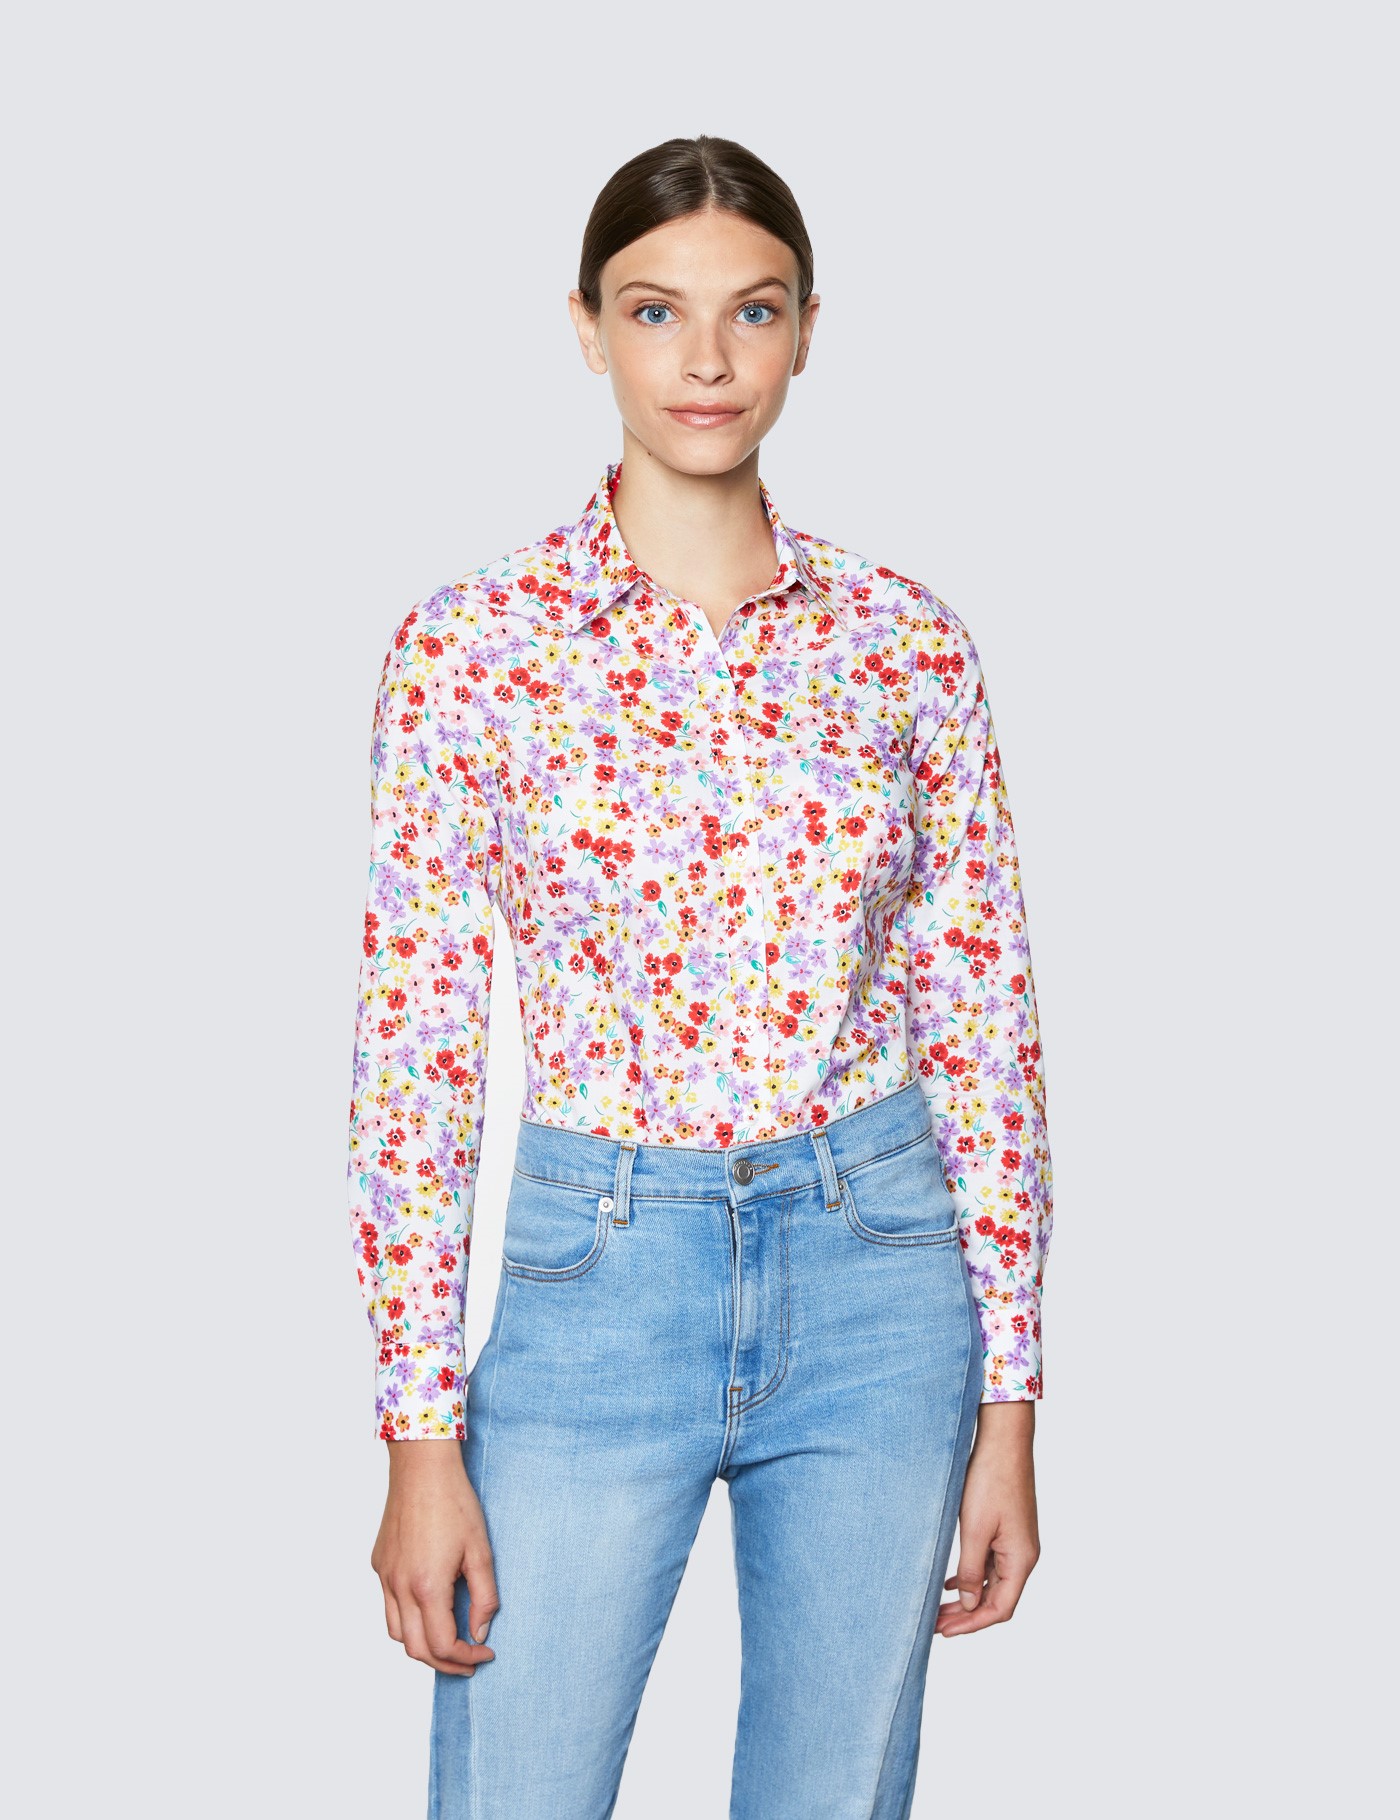 Hawes & Curtis Women's White & Red Summer Floral Print Semi Fitted Shirt